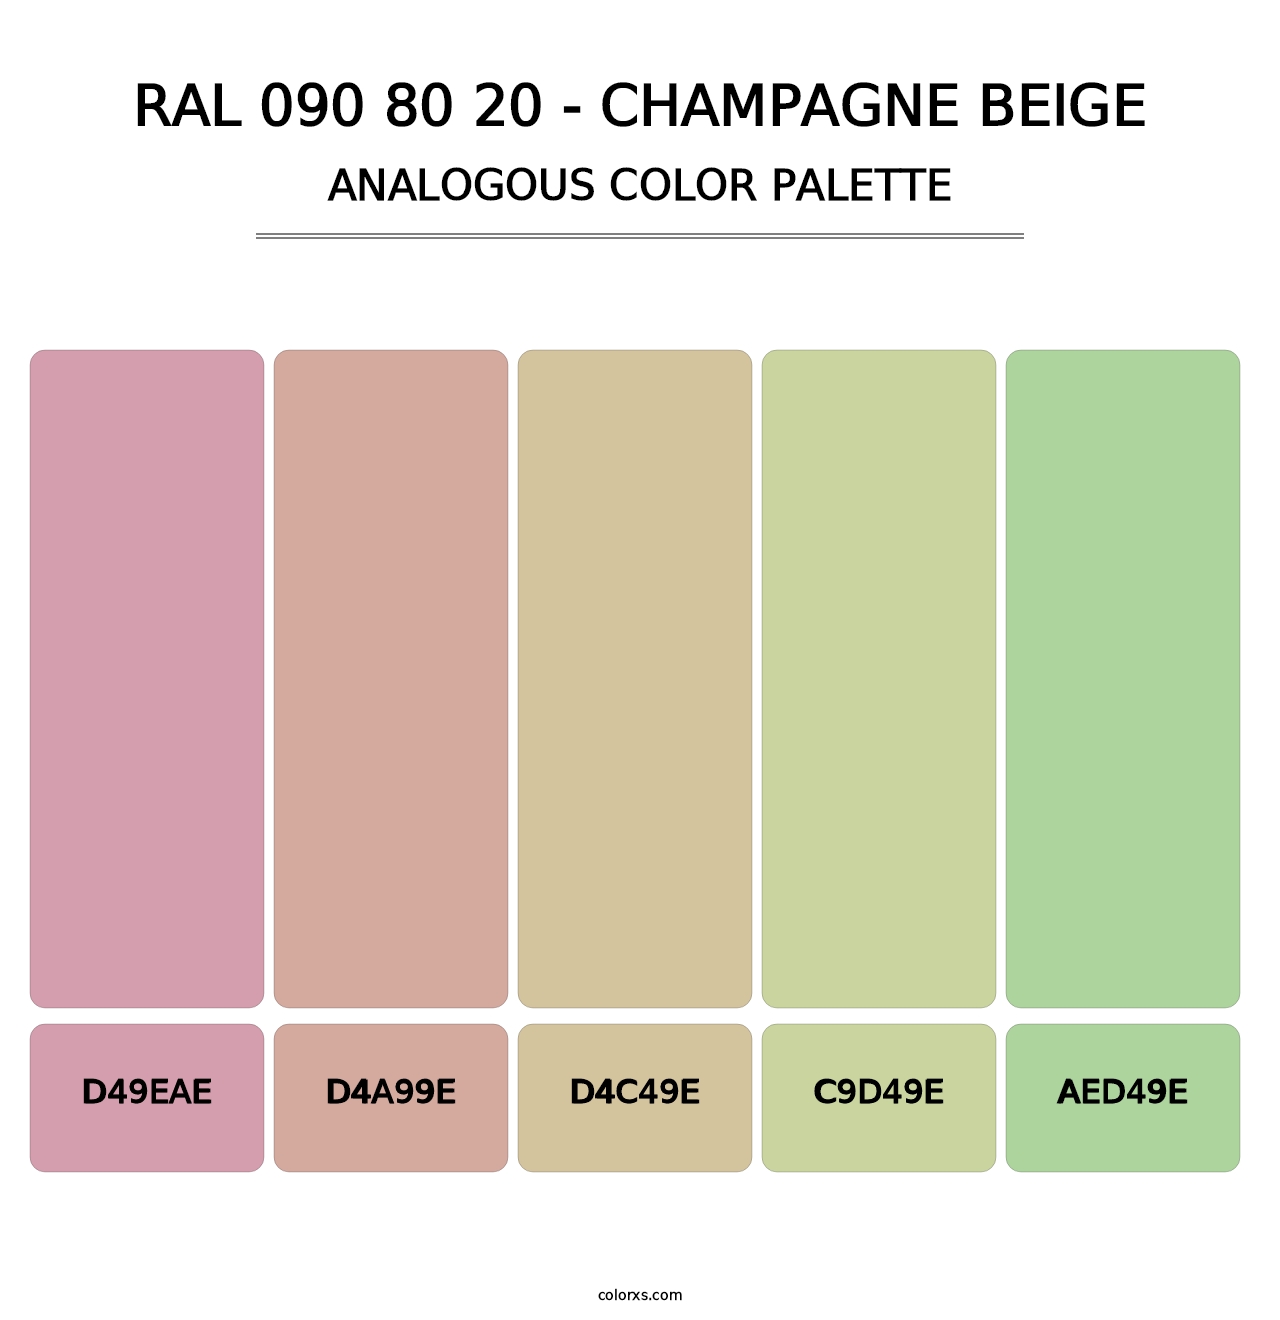 RAL 090 80 20 - Champagne Beige - Analogous Color Palette